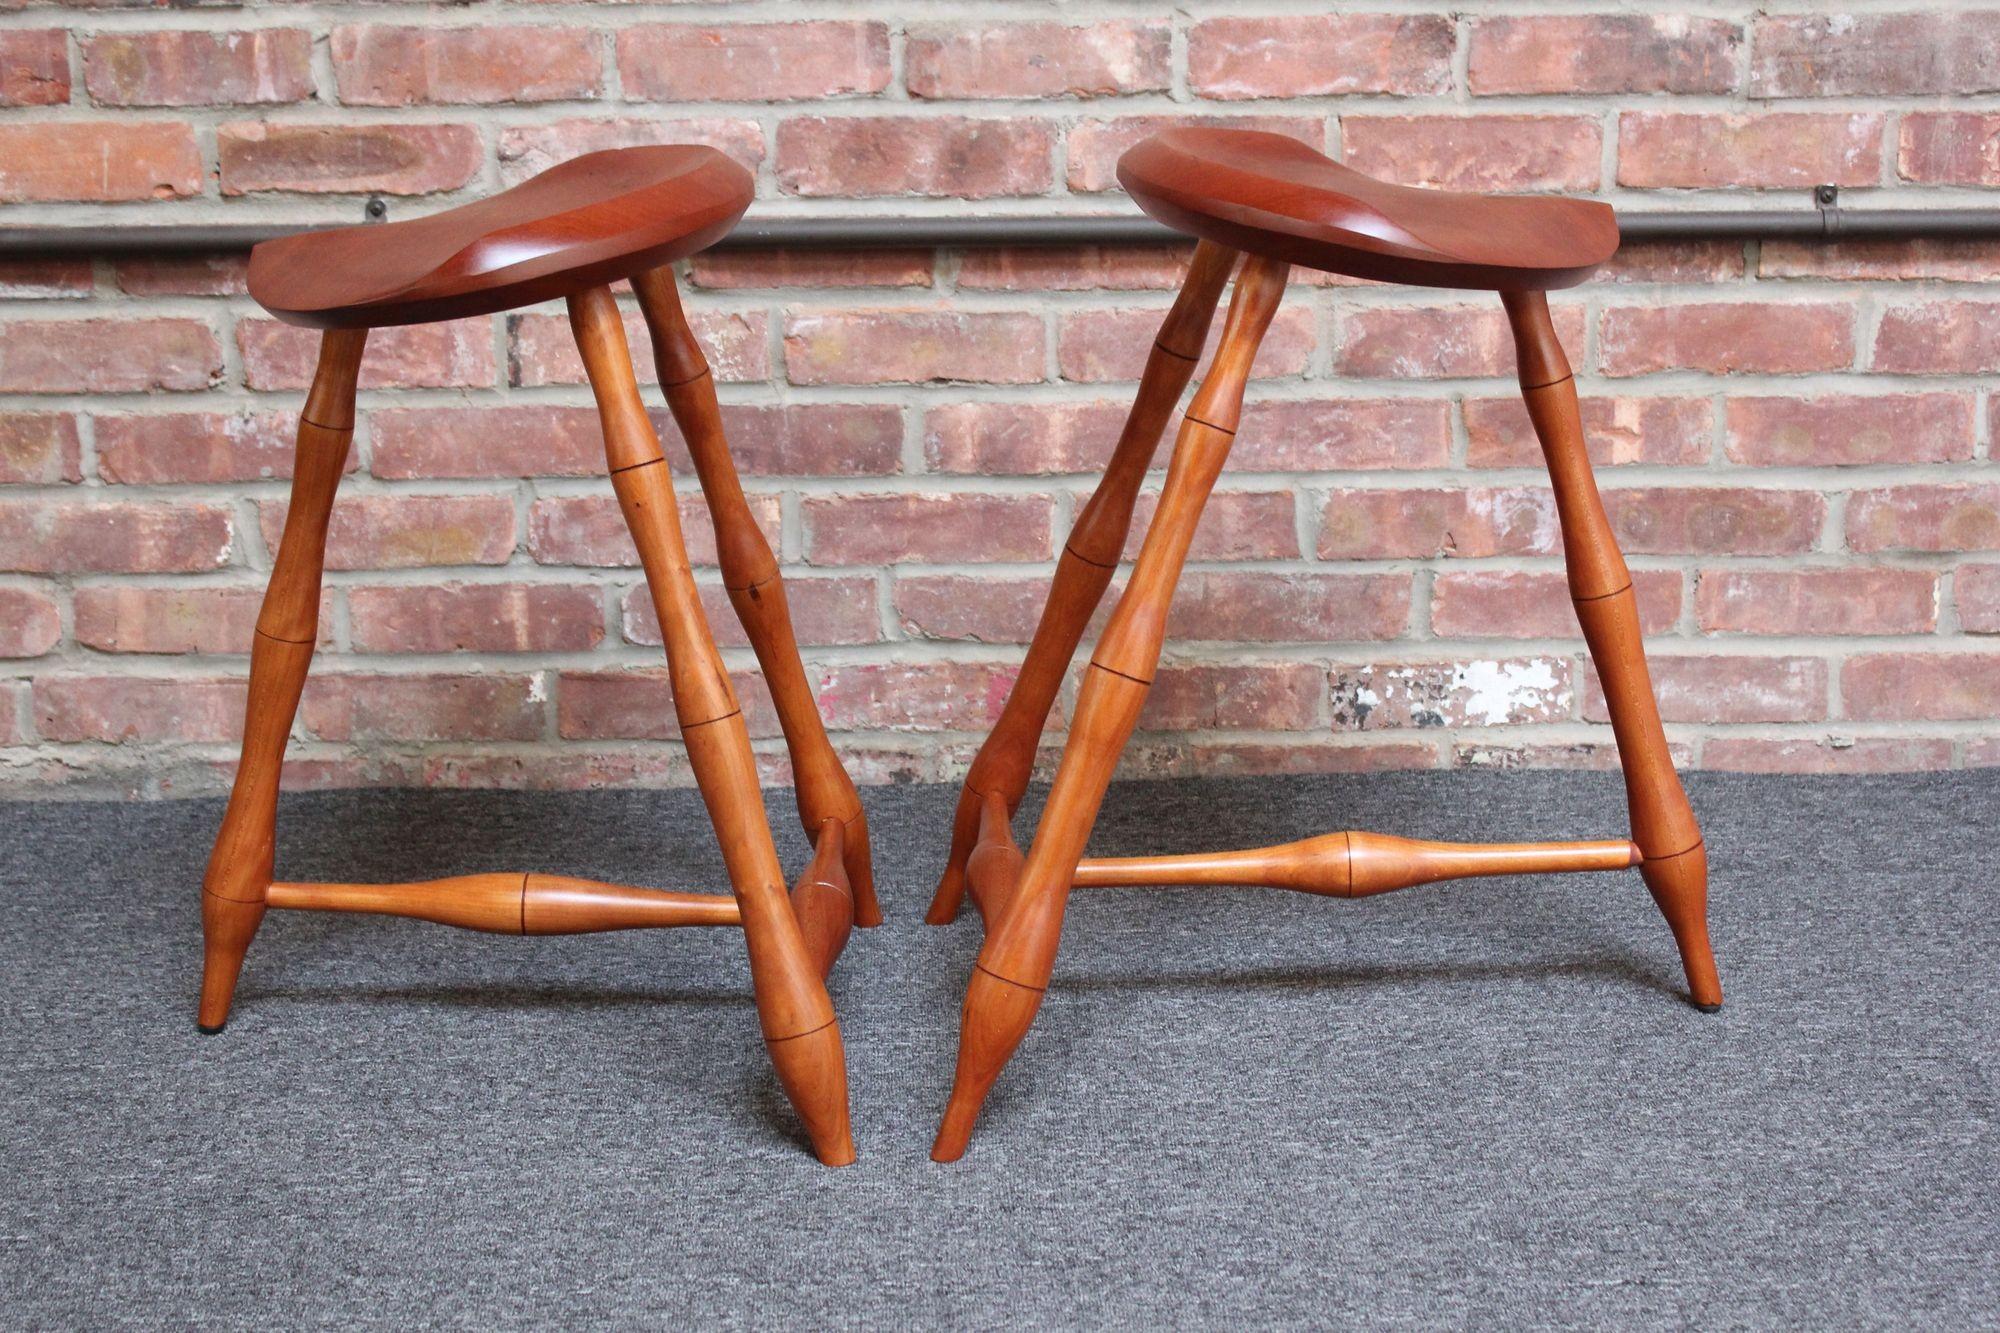 Pair of Vintage Studio Craft Windsor-Style Three Legged Low Stools in Cherrywood For Sale 11